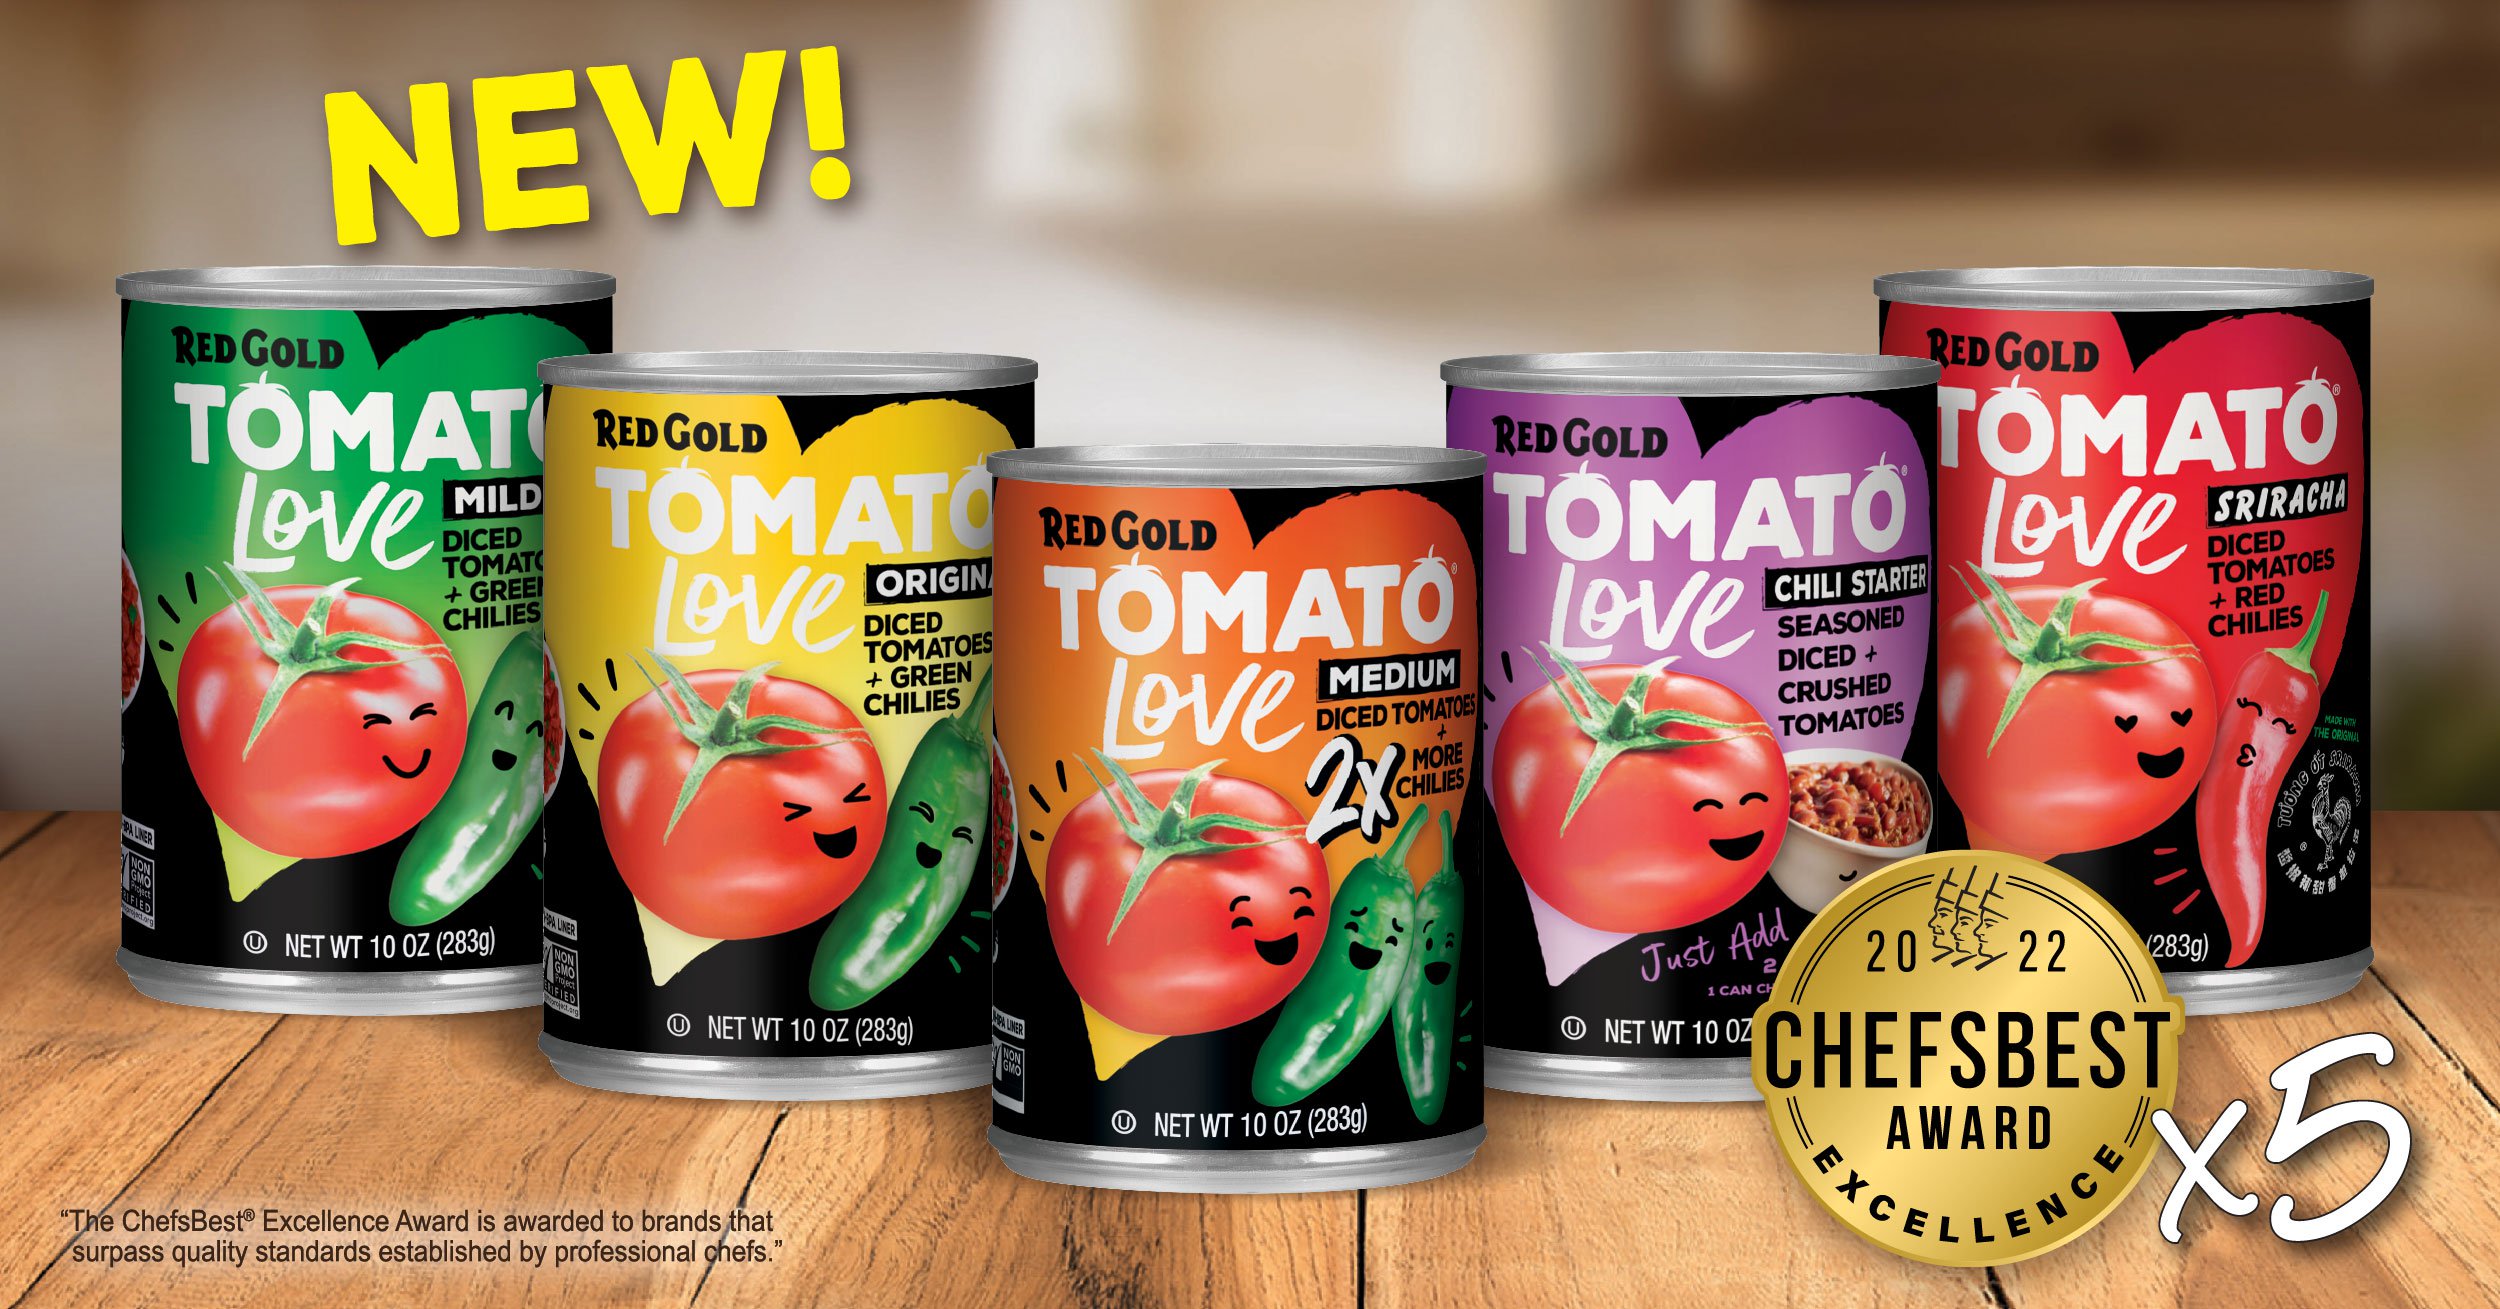 New 5 Tomato Love Product Line Up with Chefs Best Award